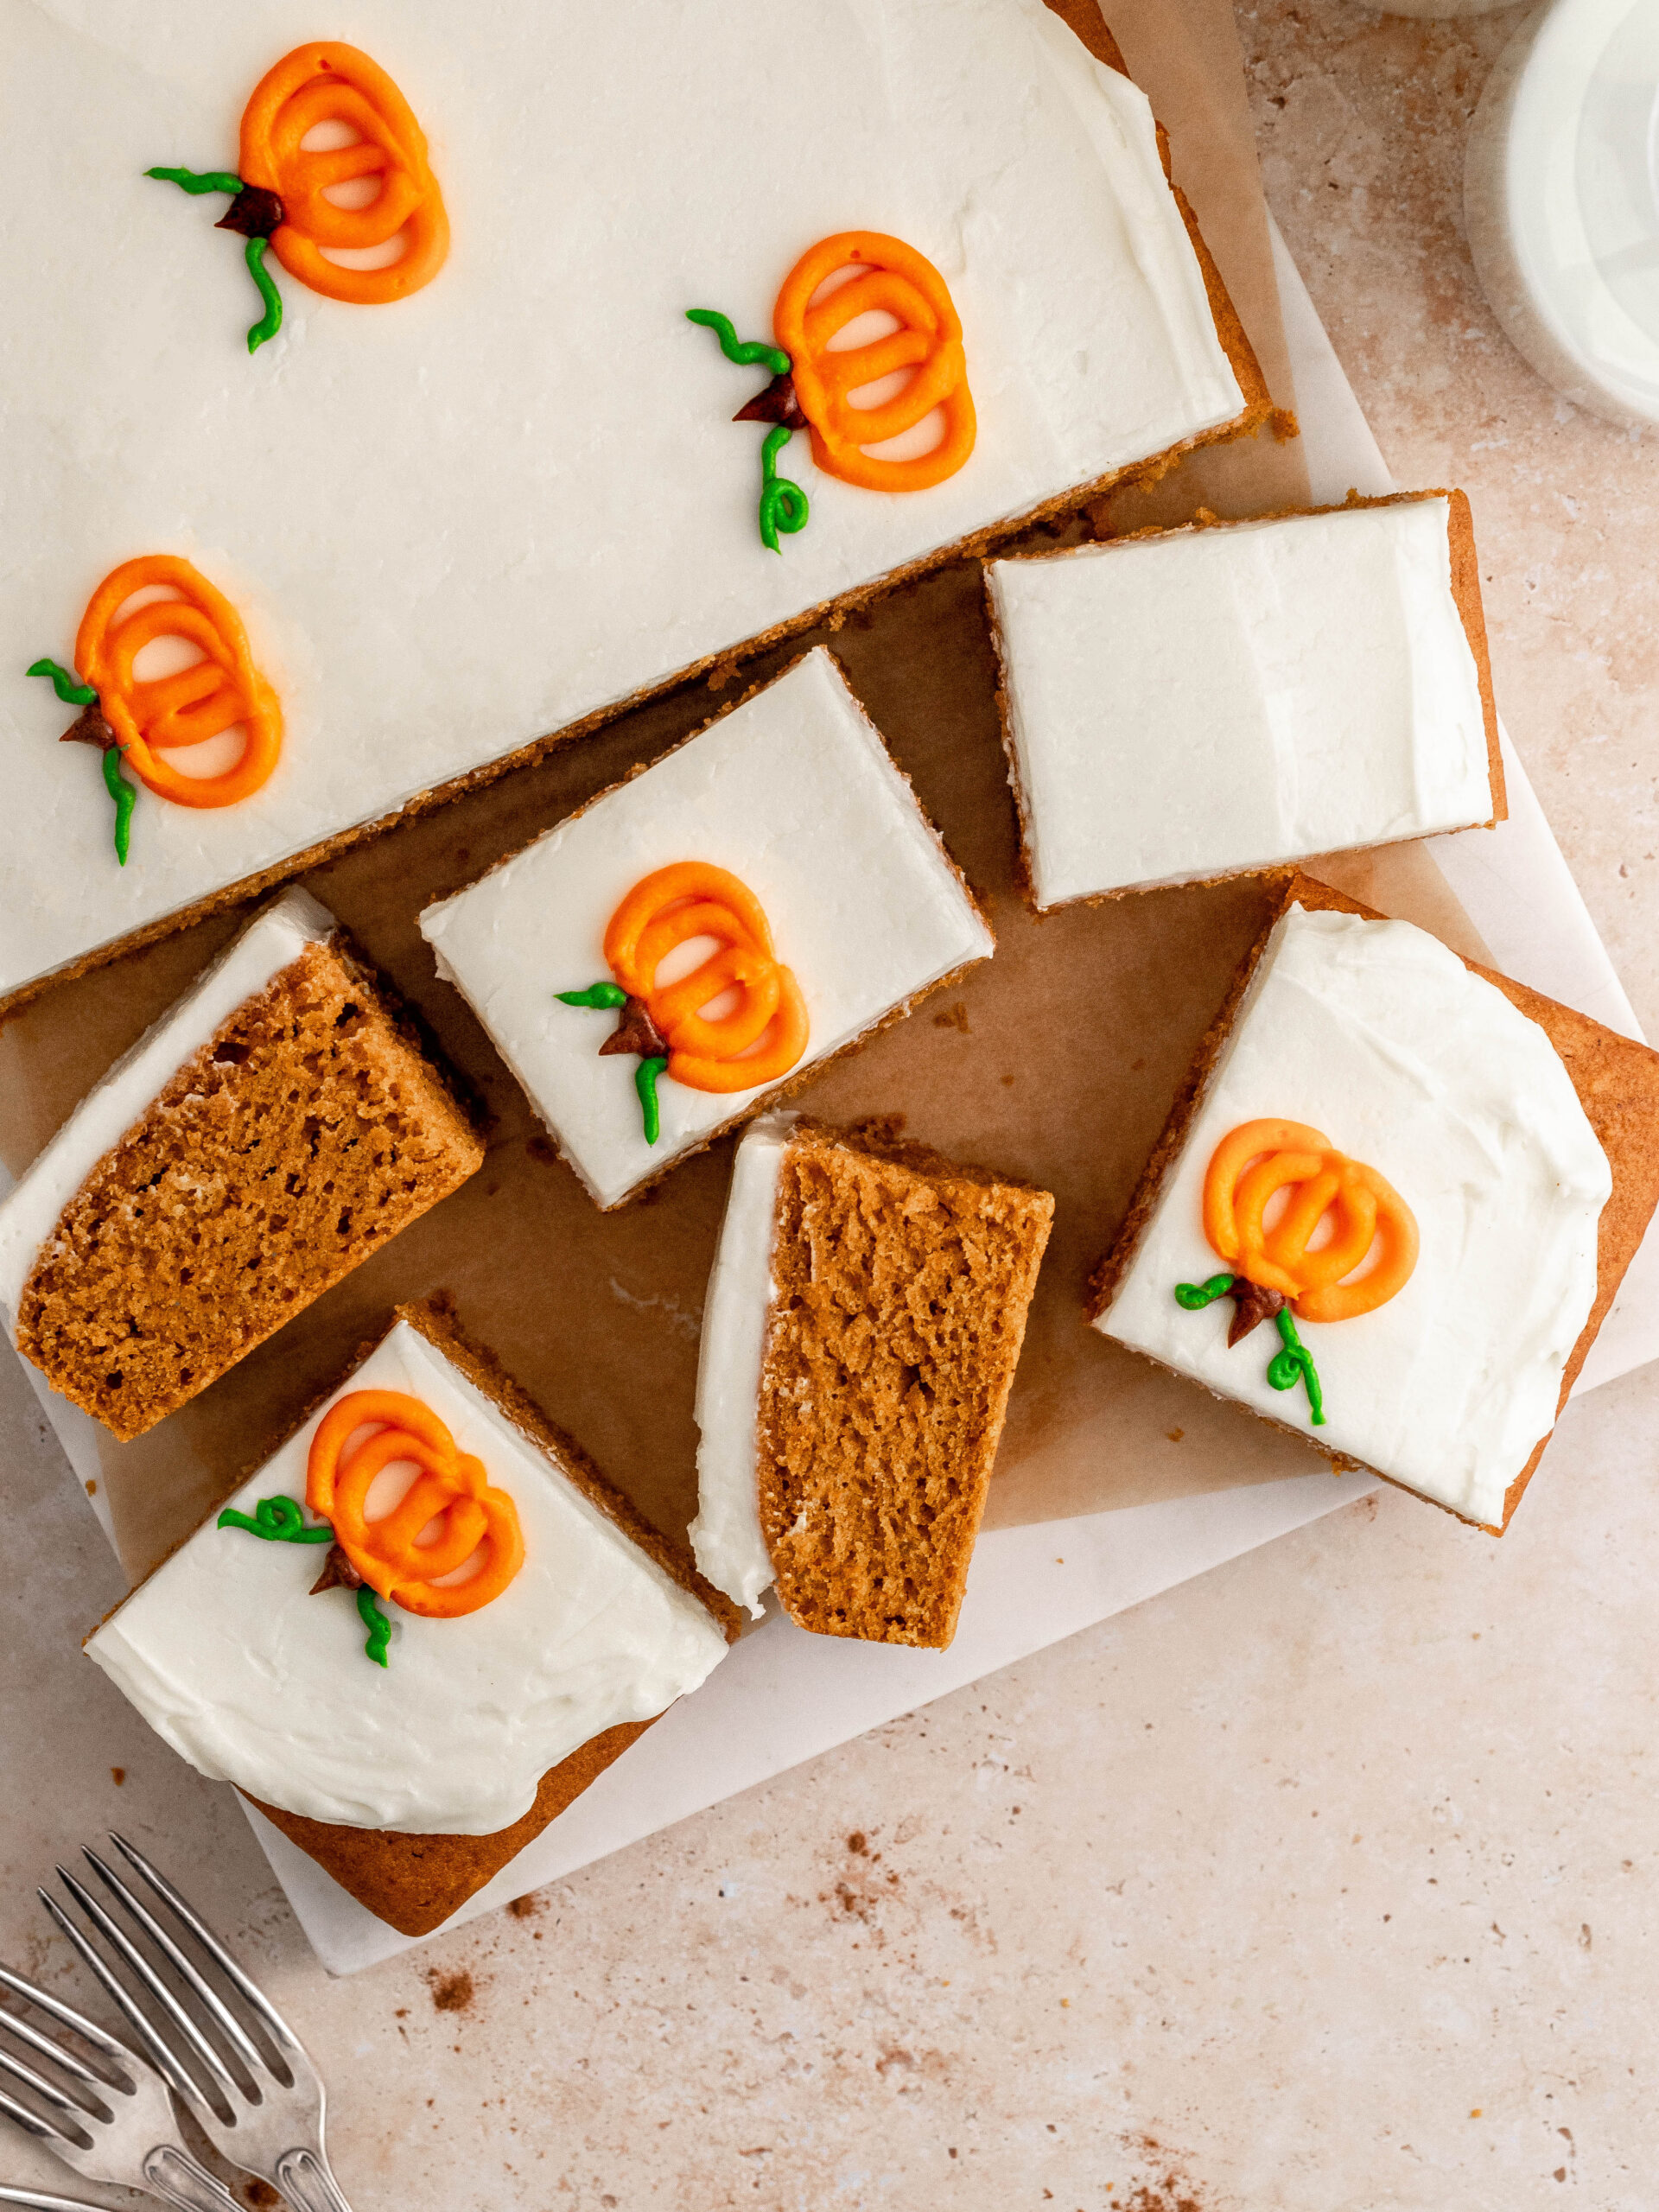 Pumpkin sheet cake on a cake tray, cut into slices.